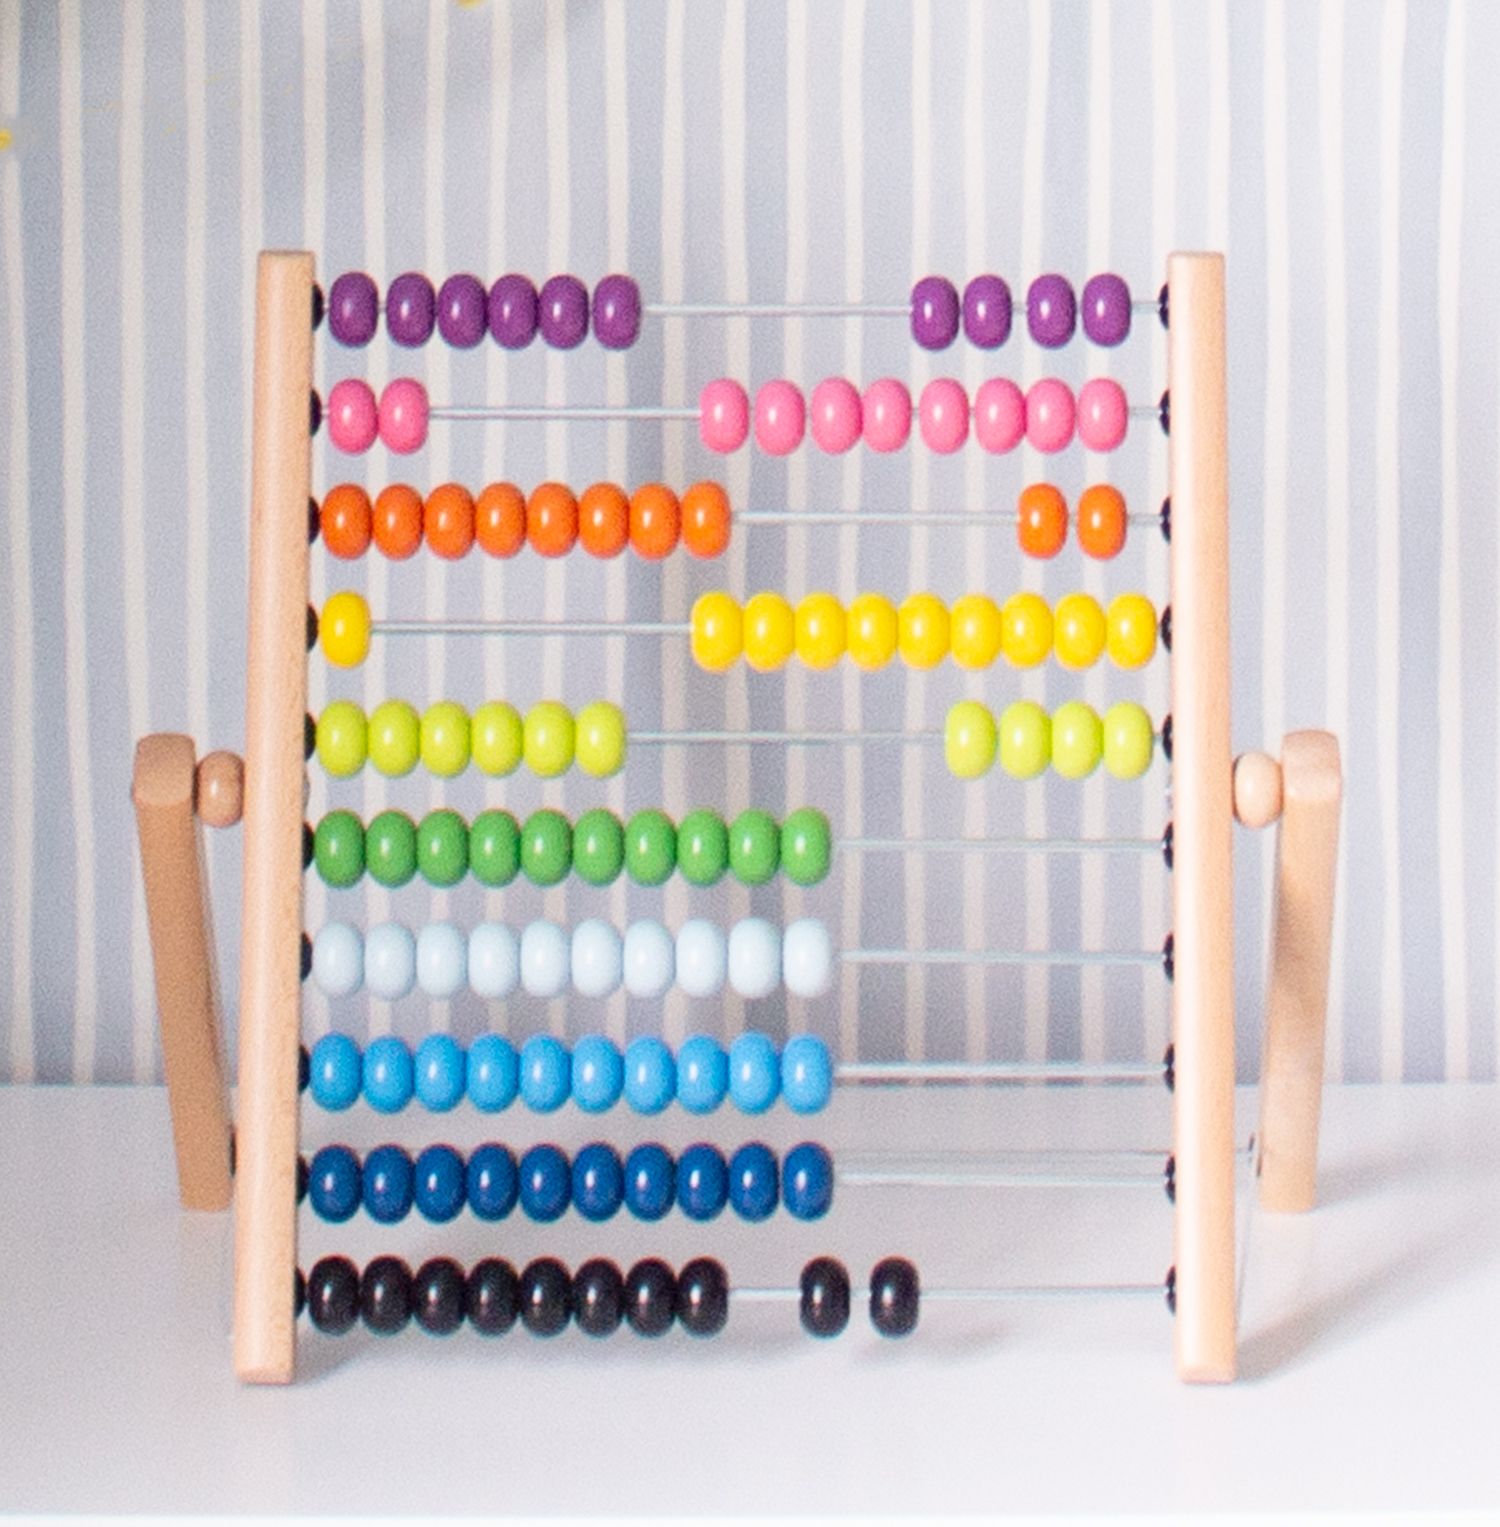 A close up of the rainbow coloured abacus on top of the dresser.